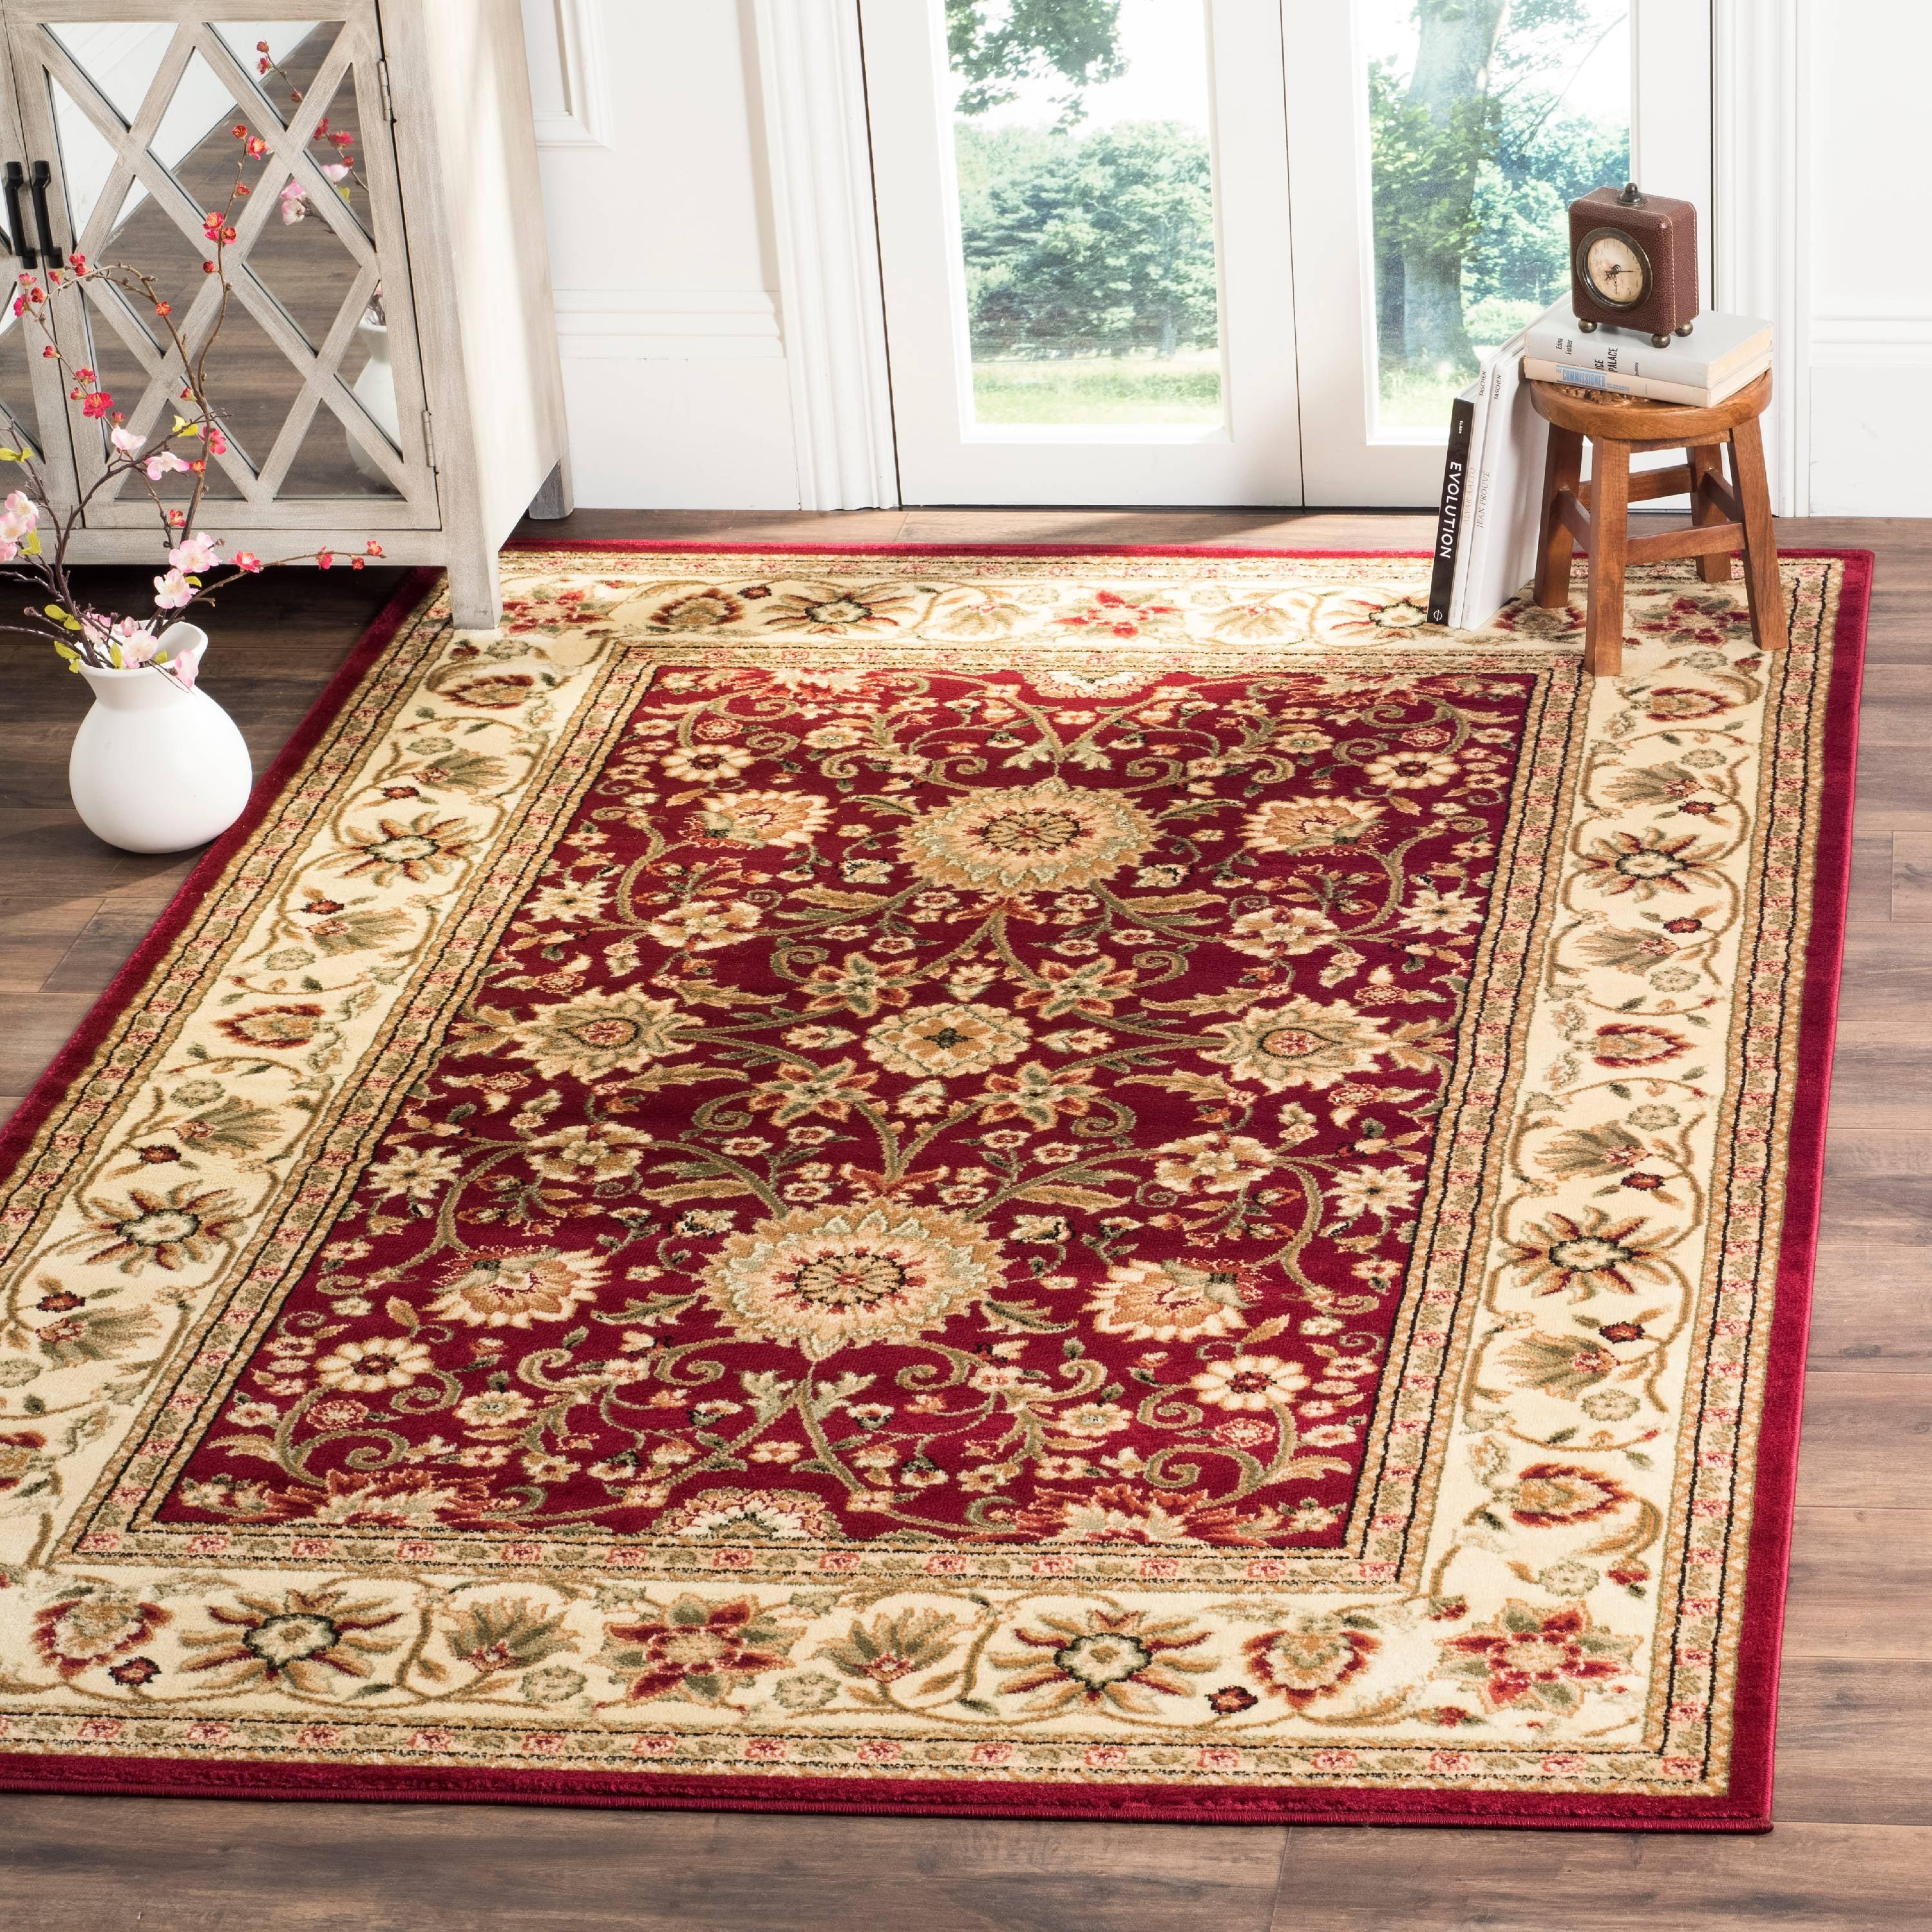 Elegant Red/Ivory Tufted Square Synthetic Area Rug 6' x 9'